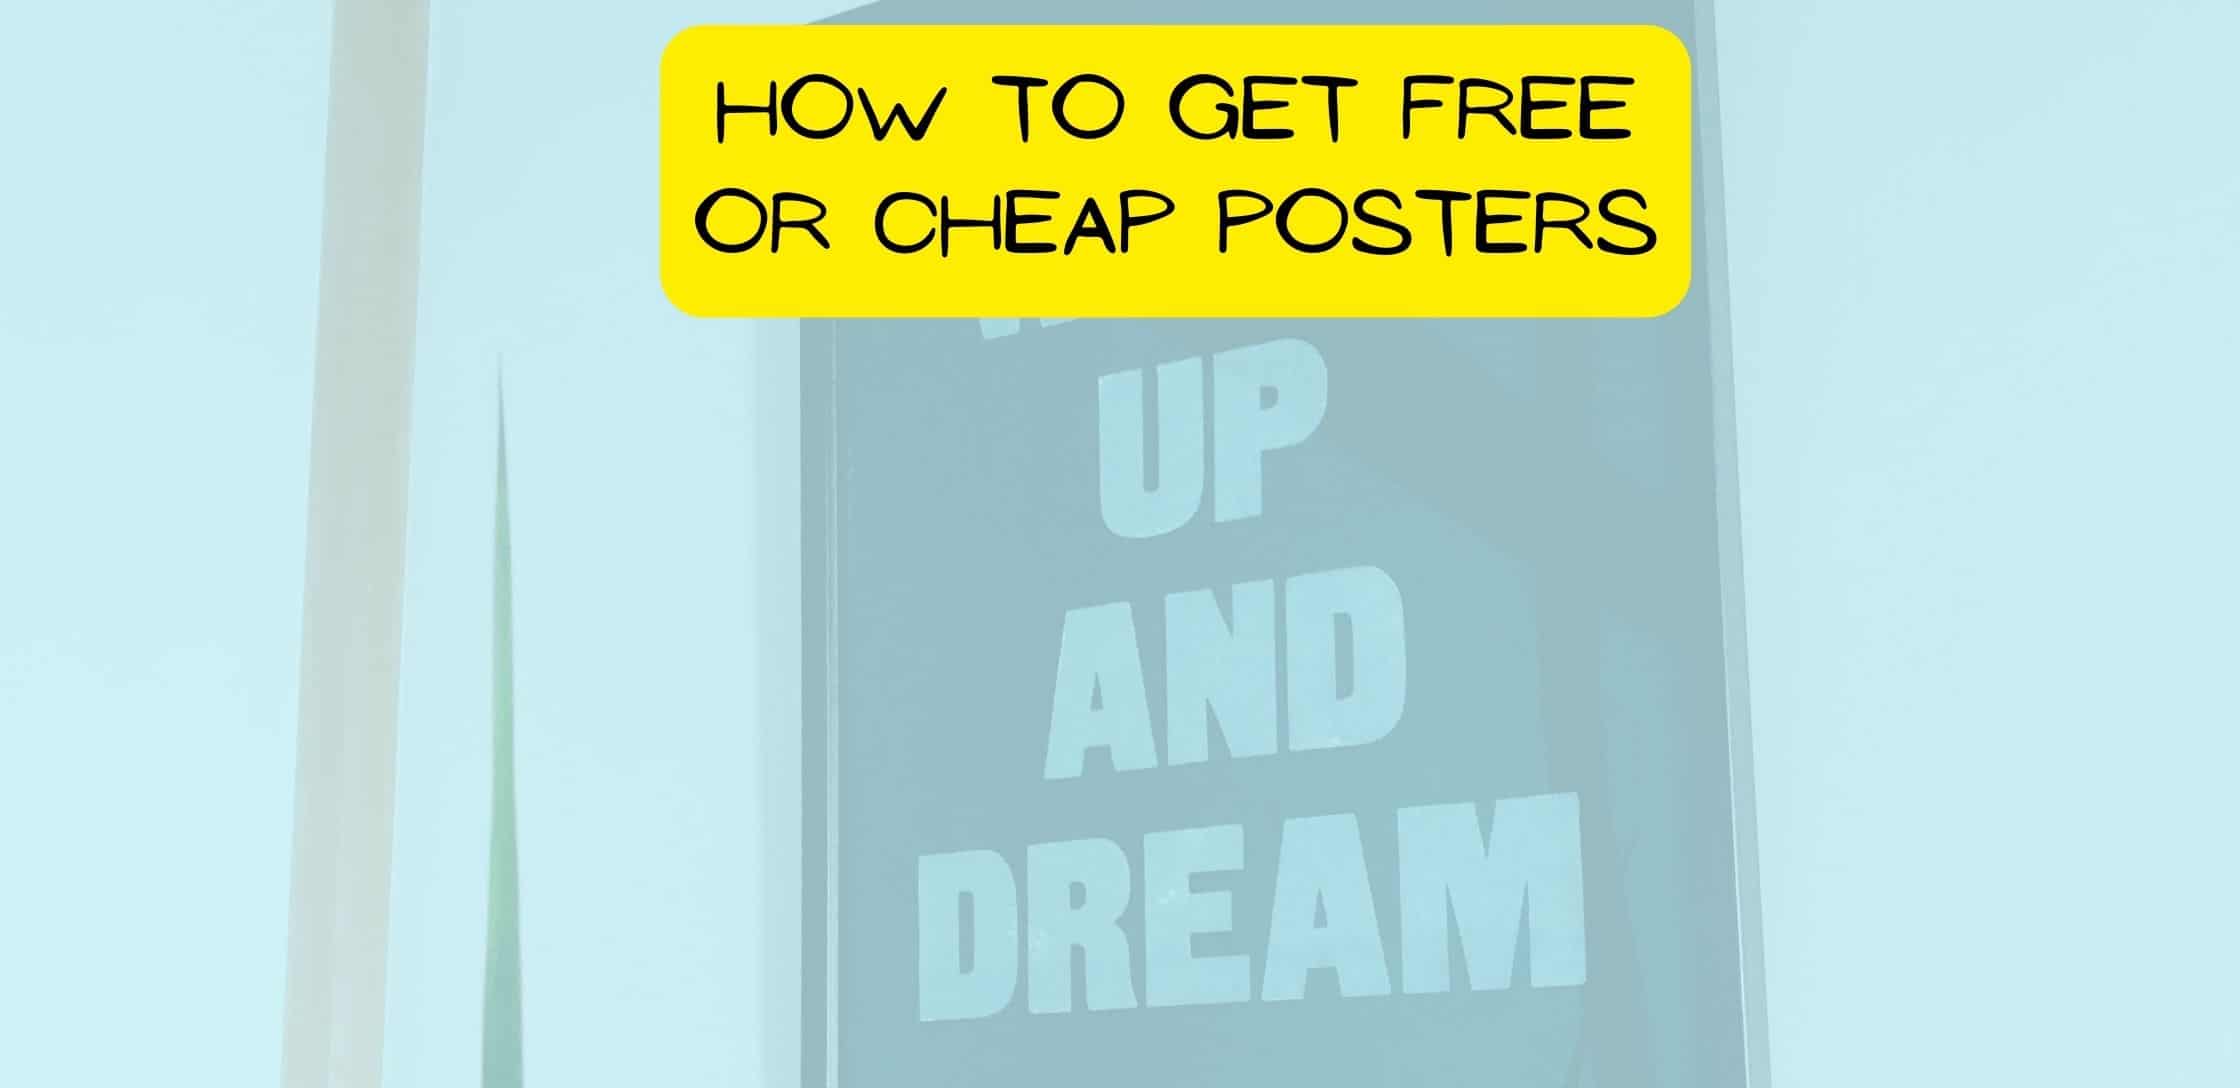 how-to-get-free-or-cheap-posters